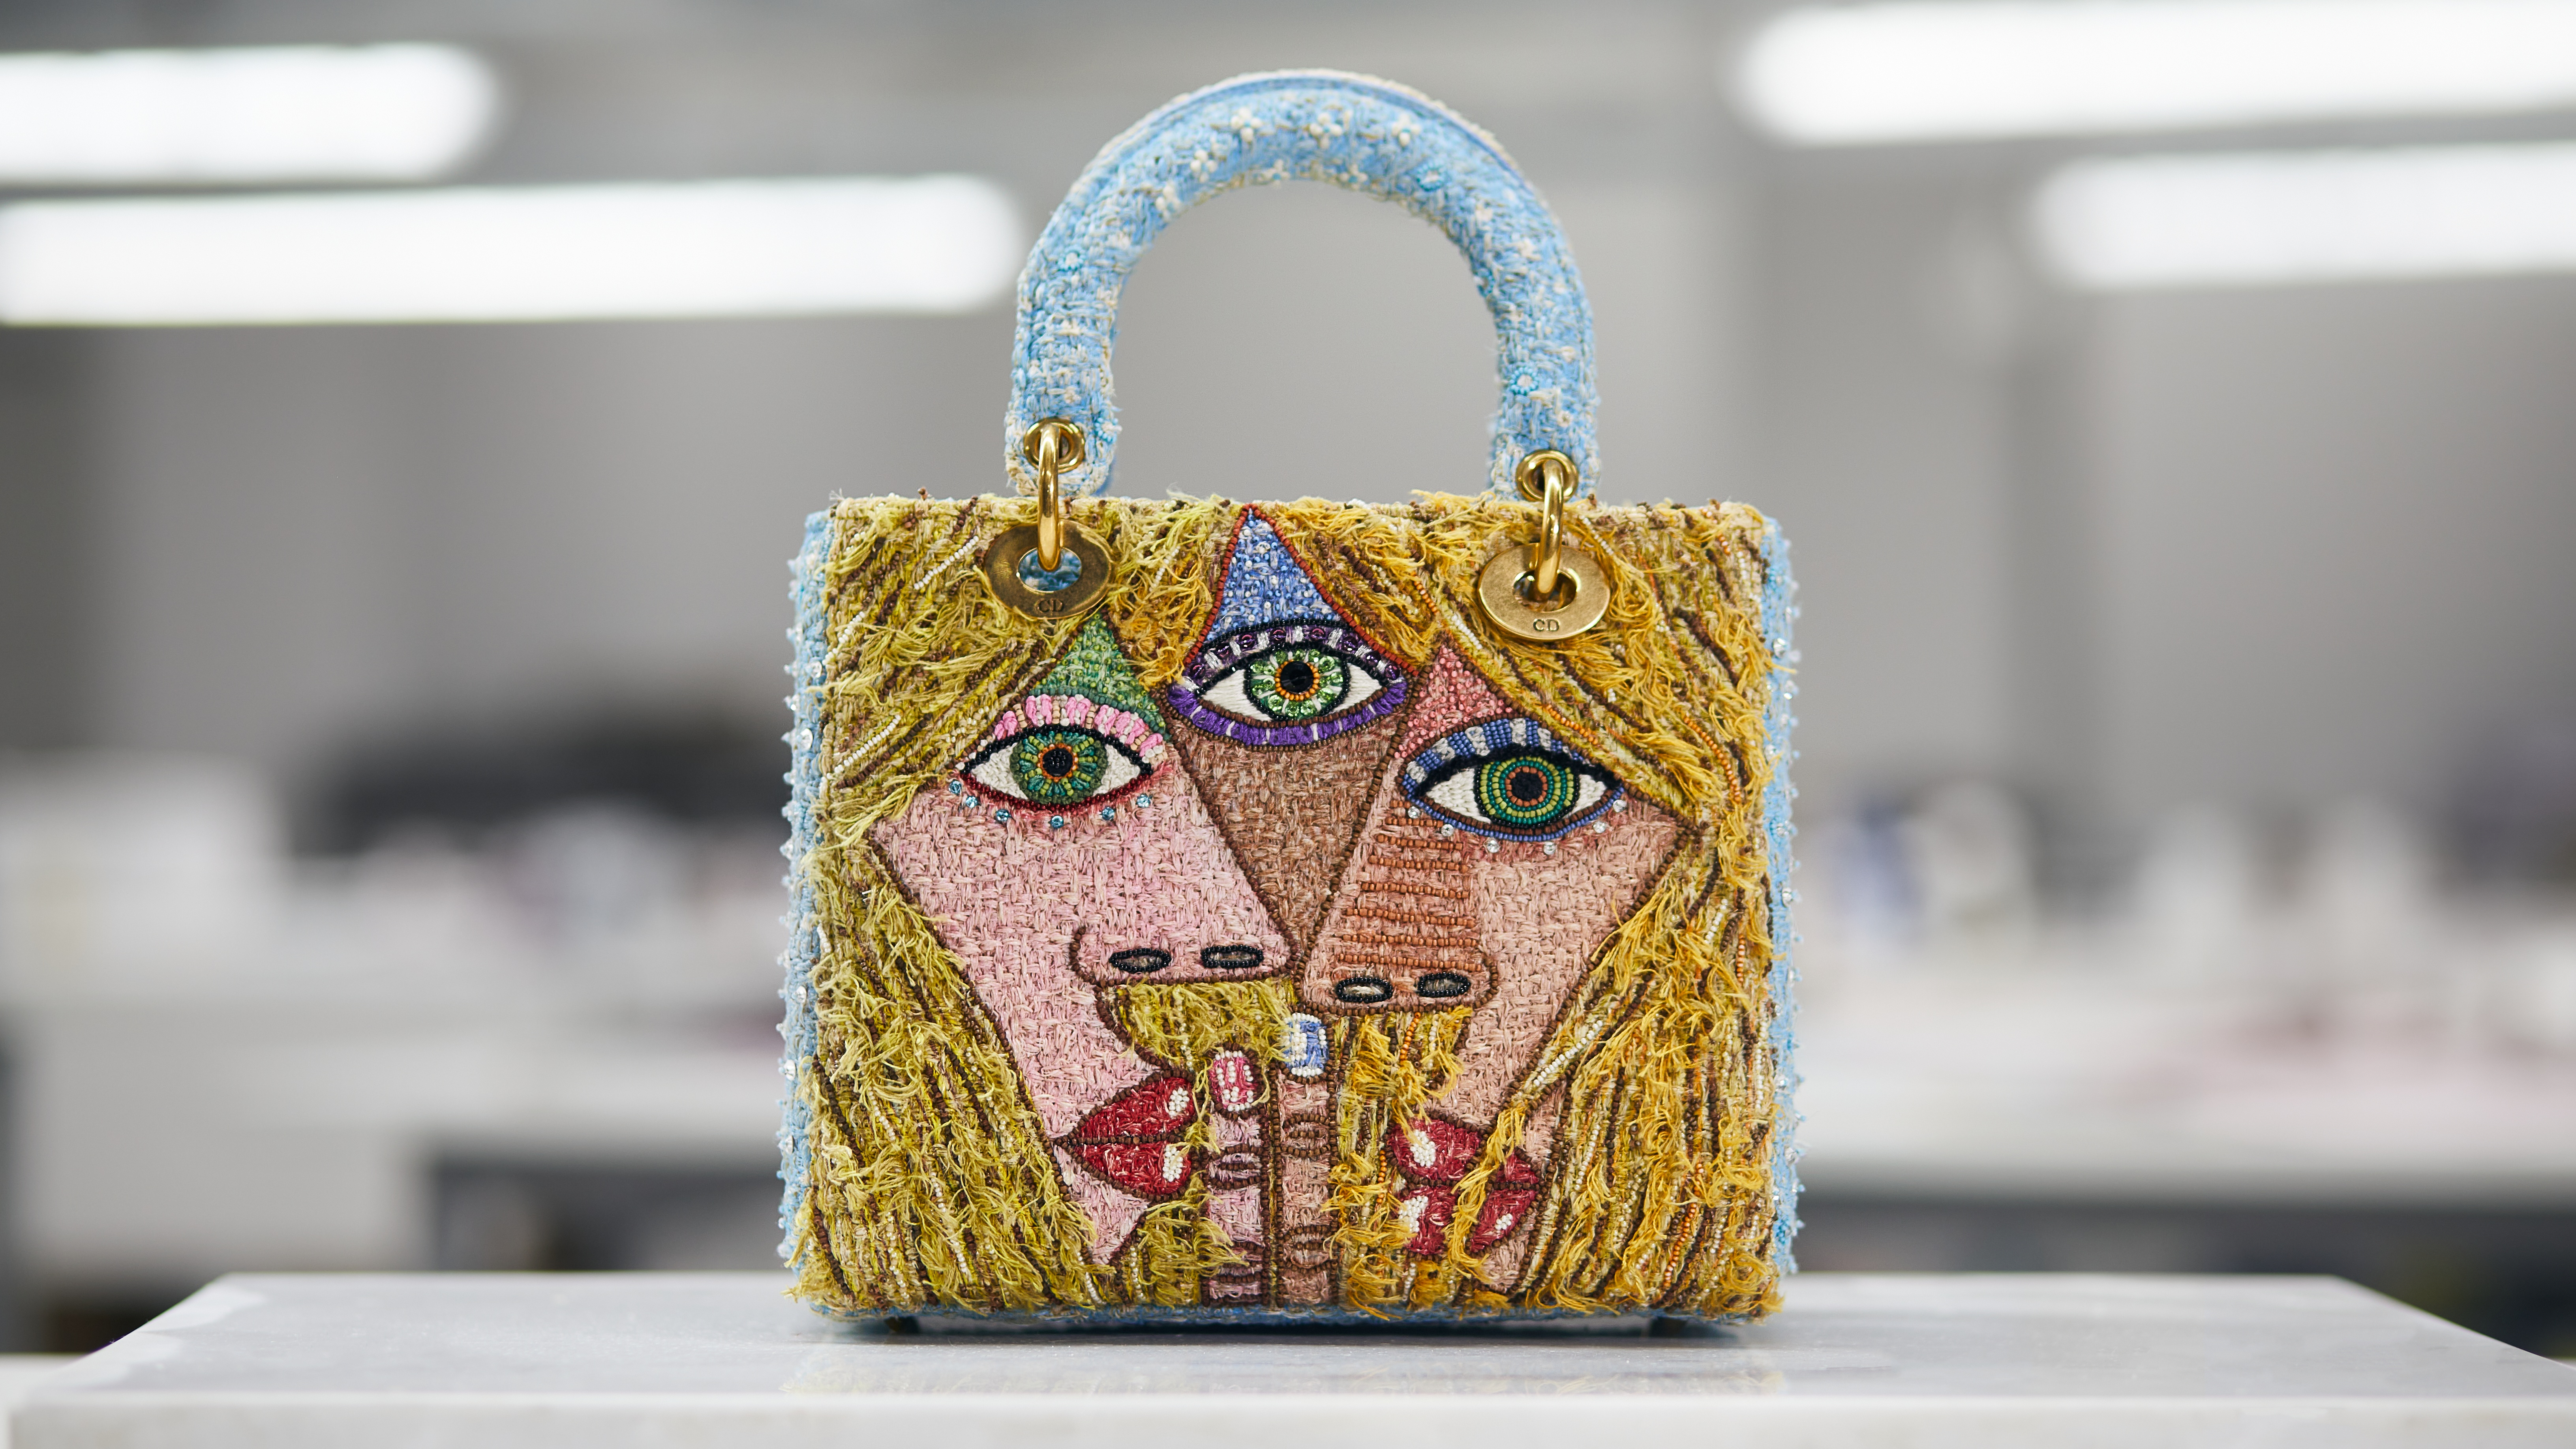 Artists are putting their stamp on the Lady Dior handbag  Wallpaper